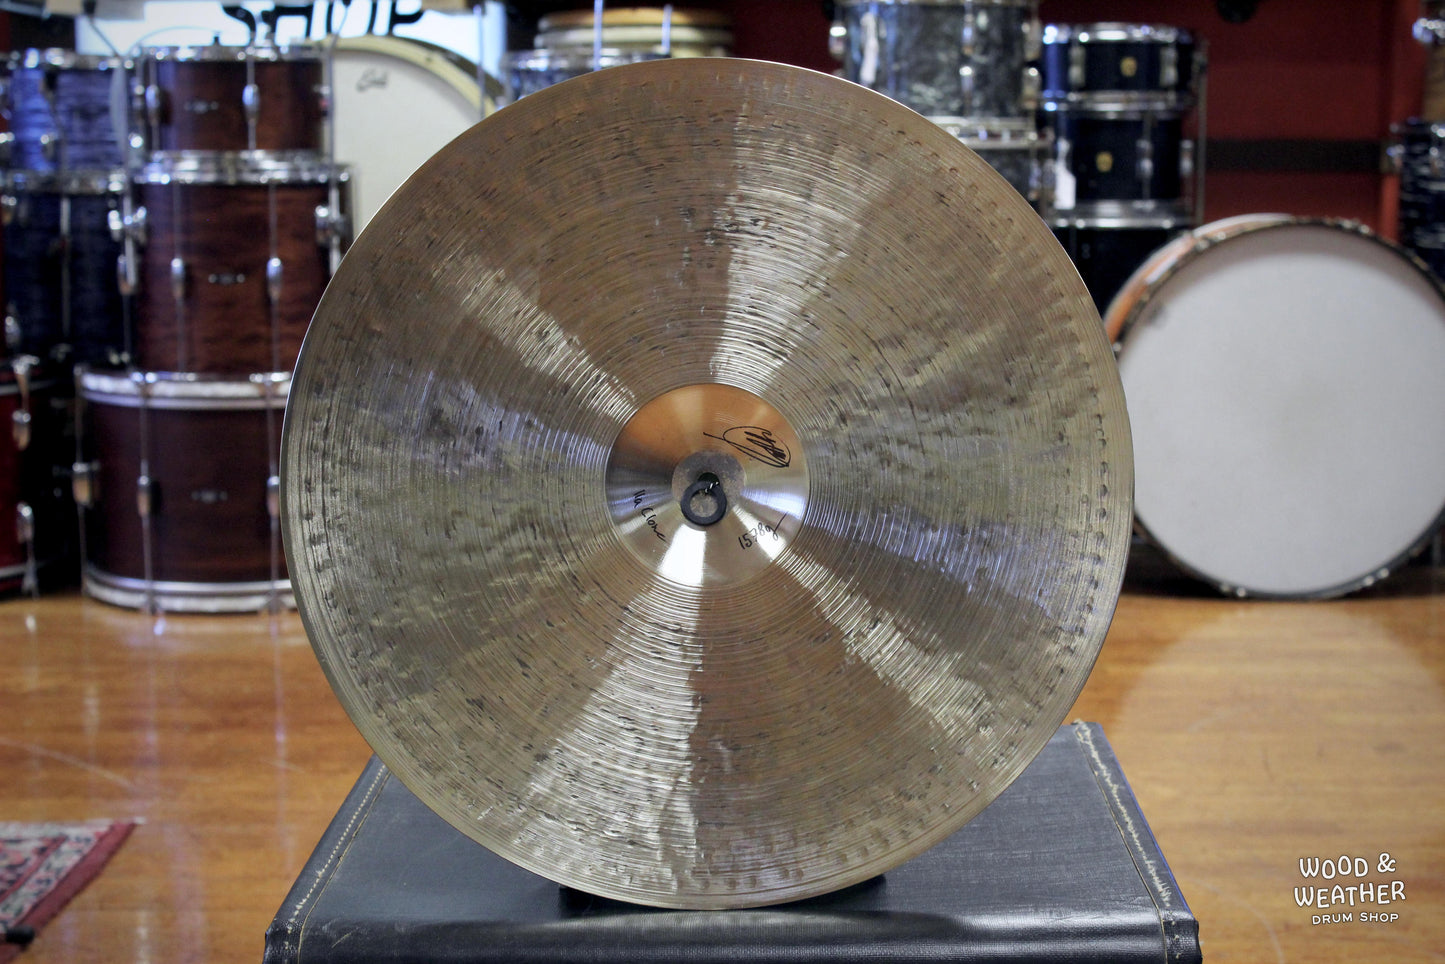 Funch Cymbals 18" Old Stamp IIa Clone Ride Cymbal 1578g